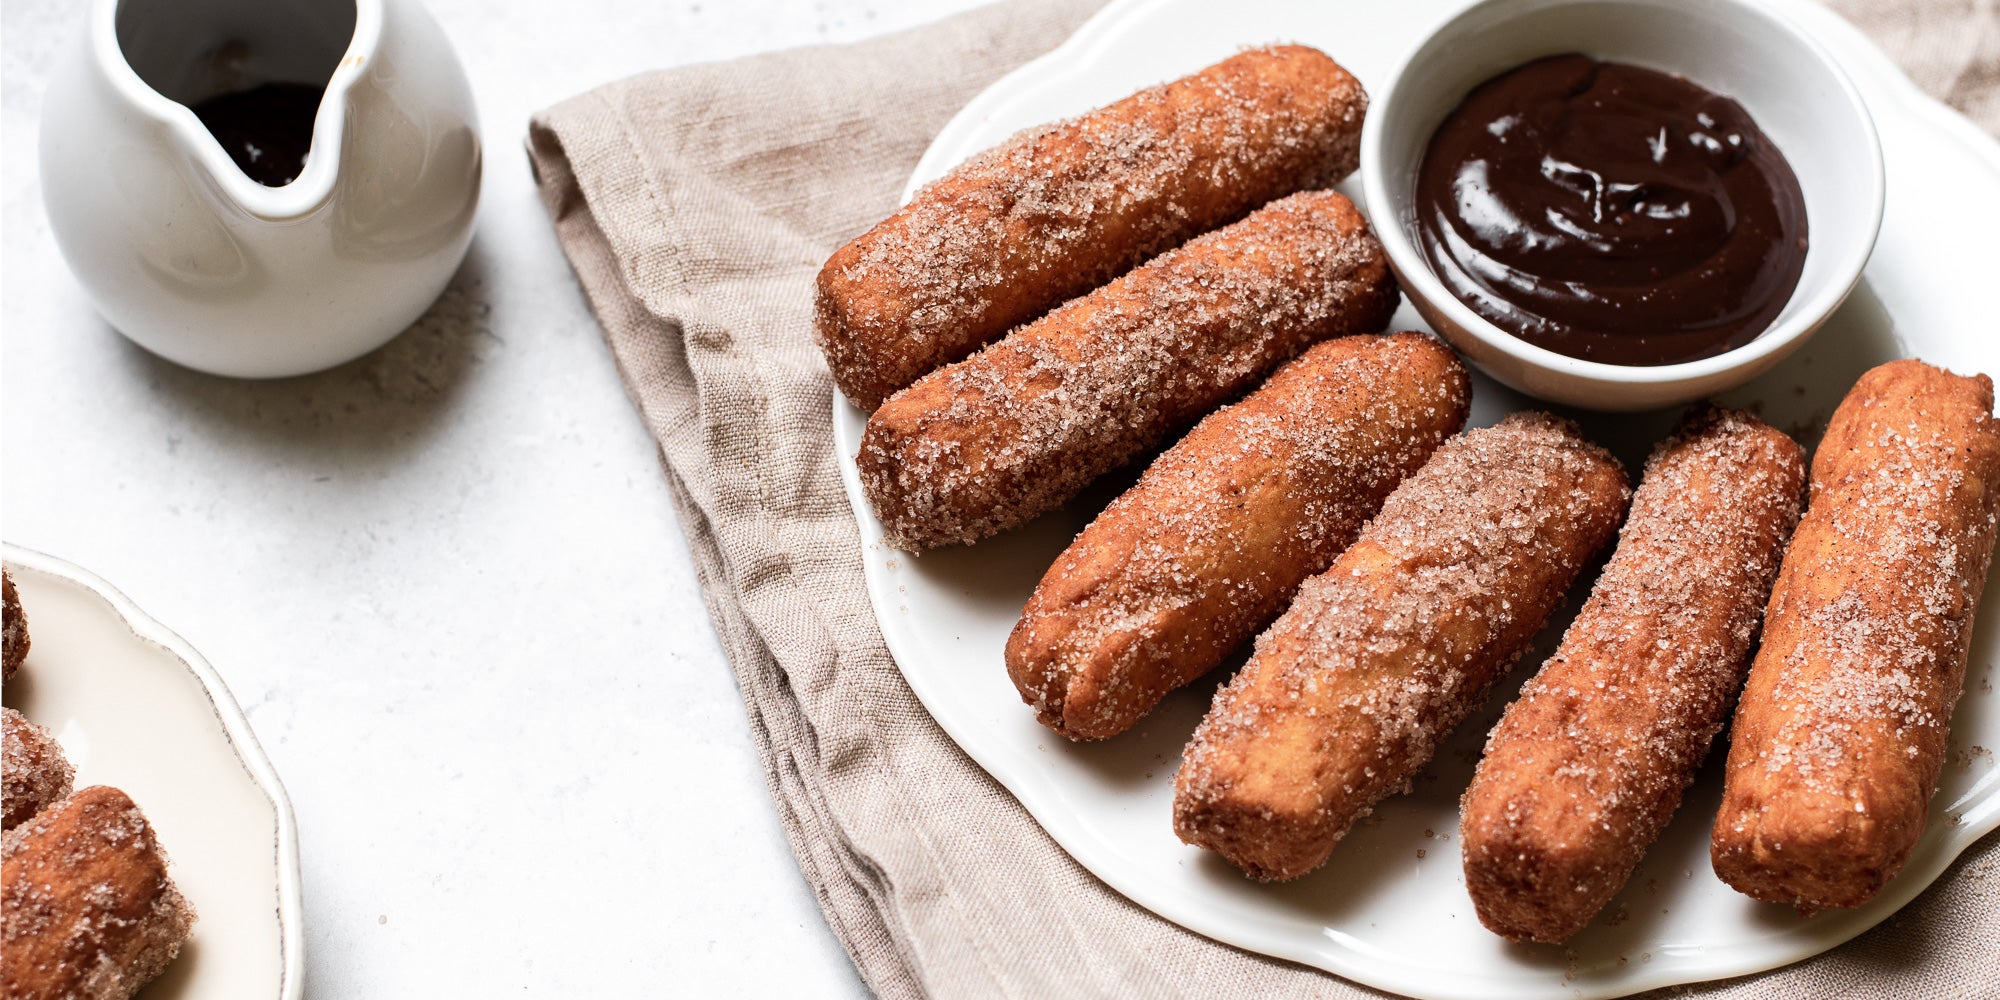 Doughnut Sticks with Chocolate Dip on a brown napkin, with a small jug of chocolate sauce